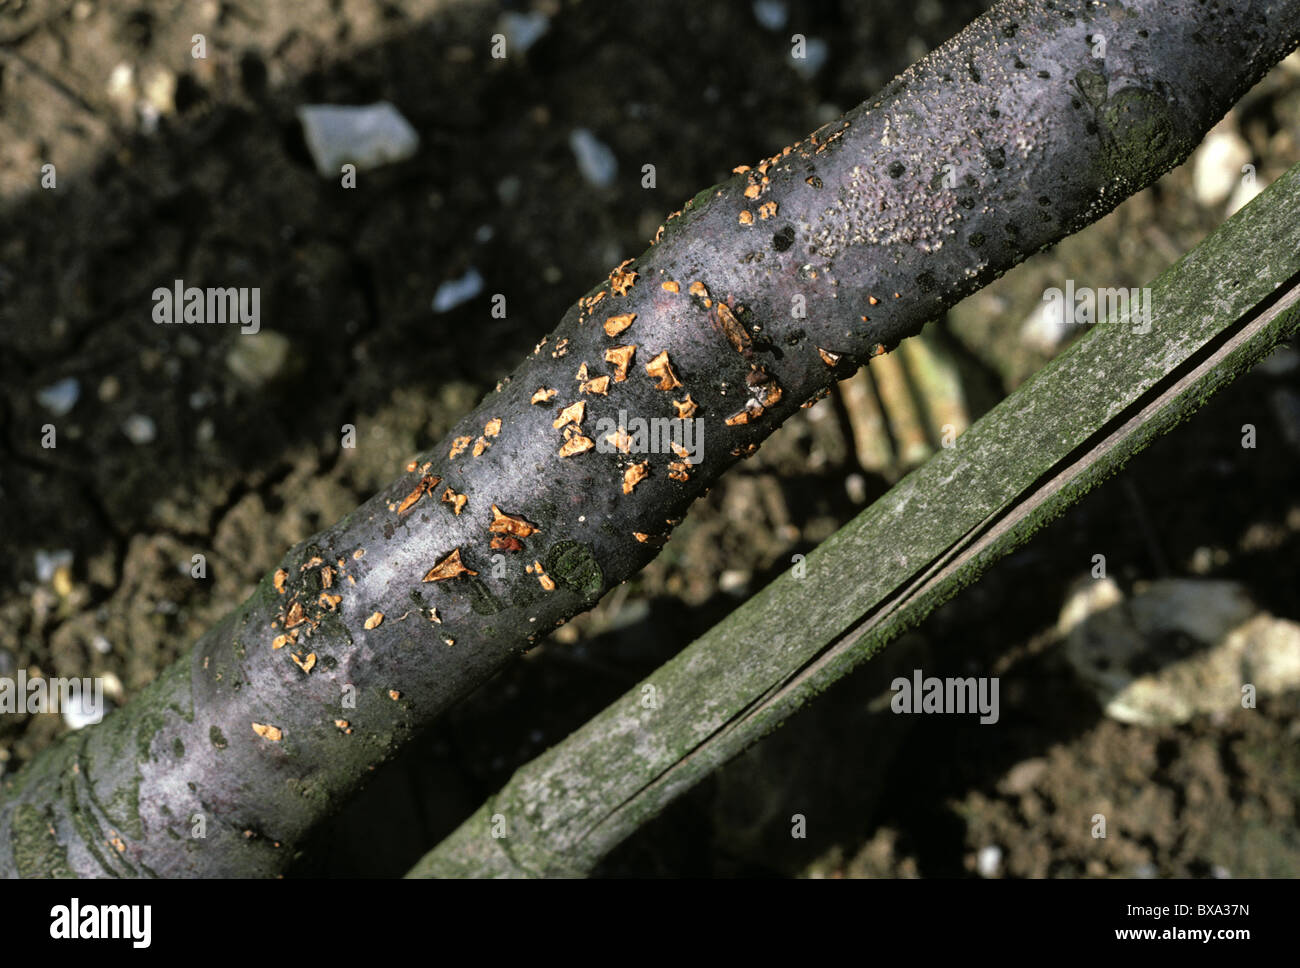 Coral spot (Nectria cinnabarina) fruiting bodies on the base of young apple tree Stock Photo